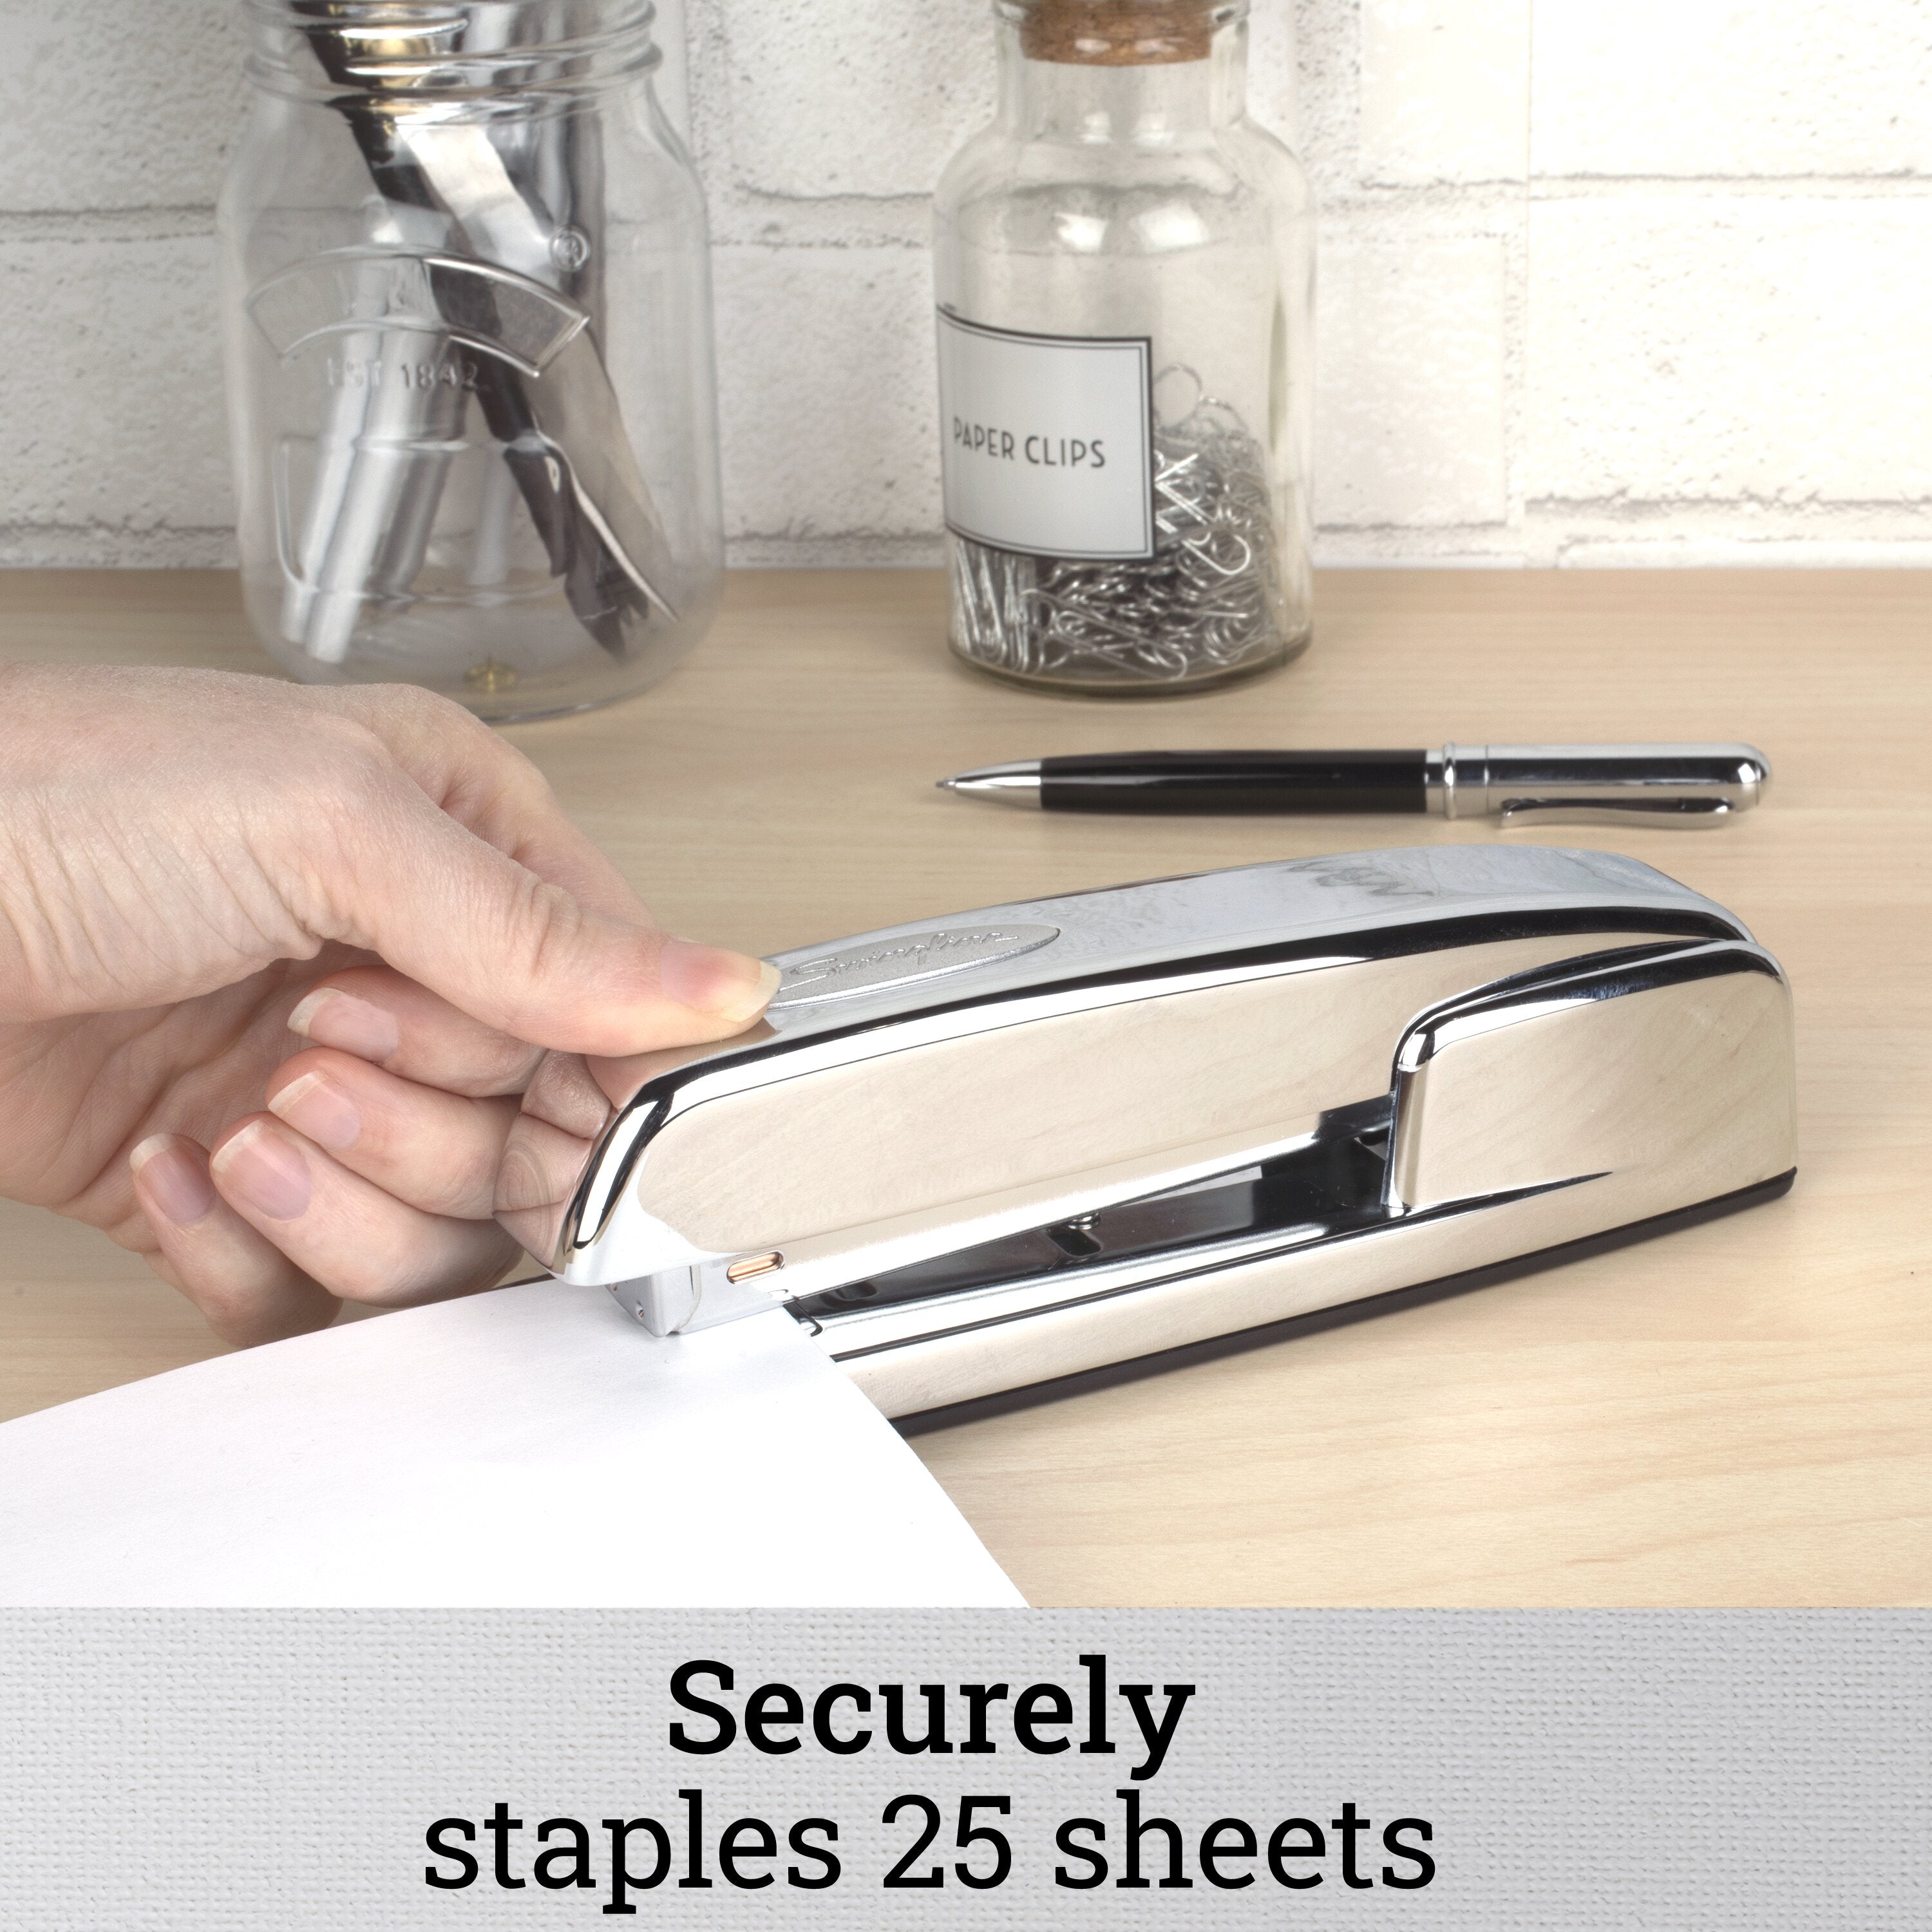 747® Polished Chrome Stapler - Collector's Edition